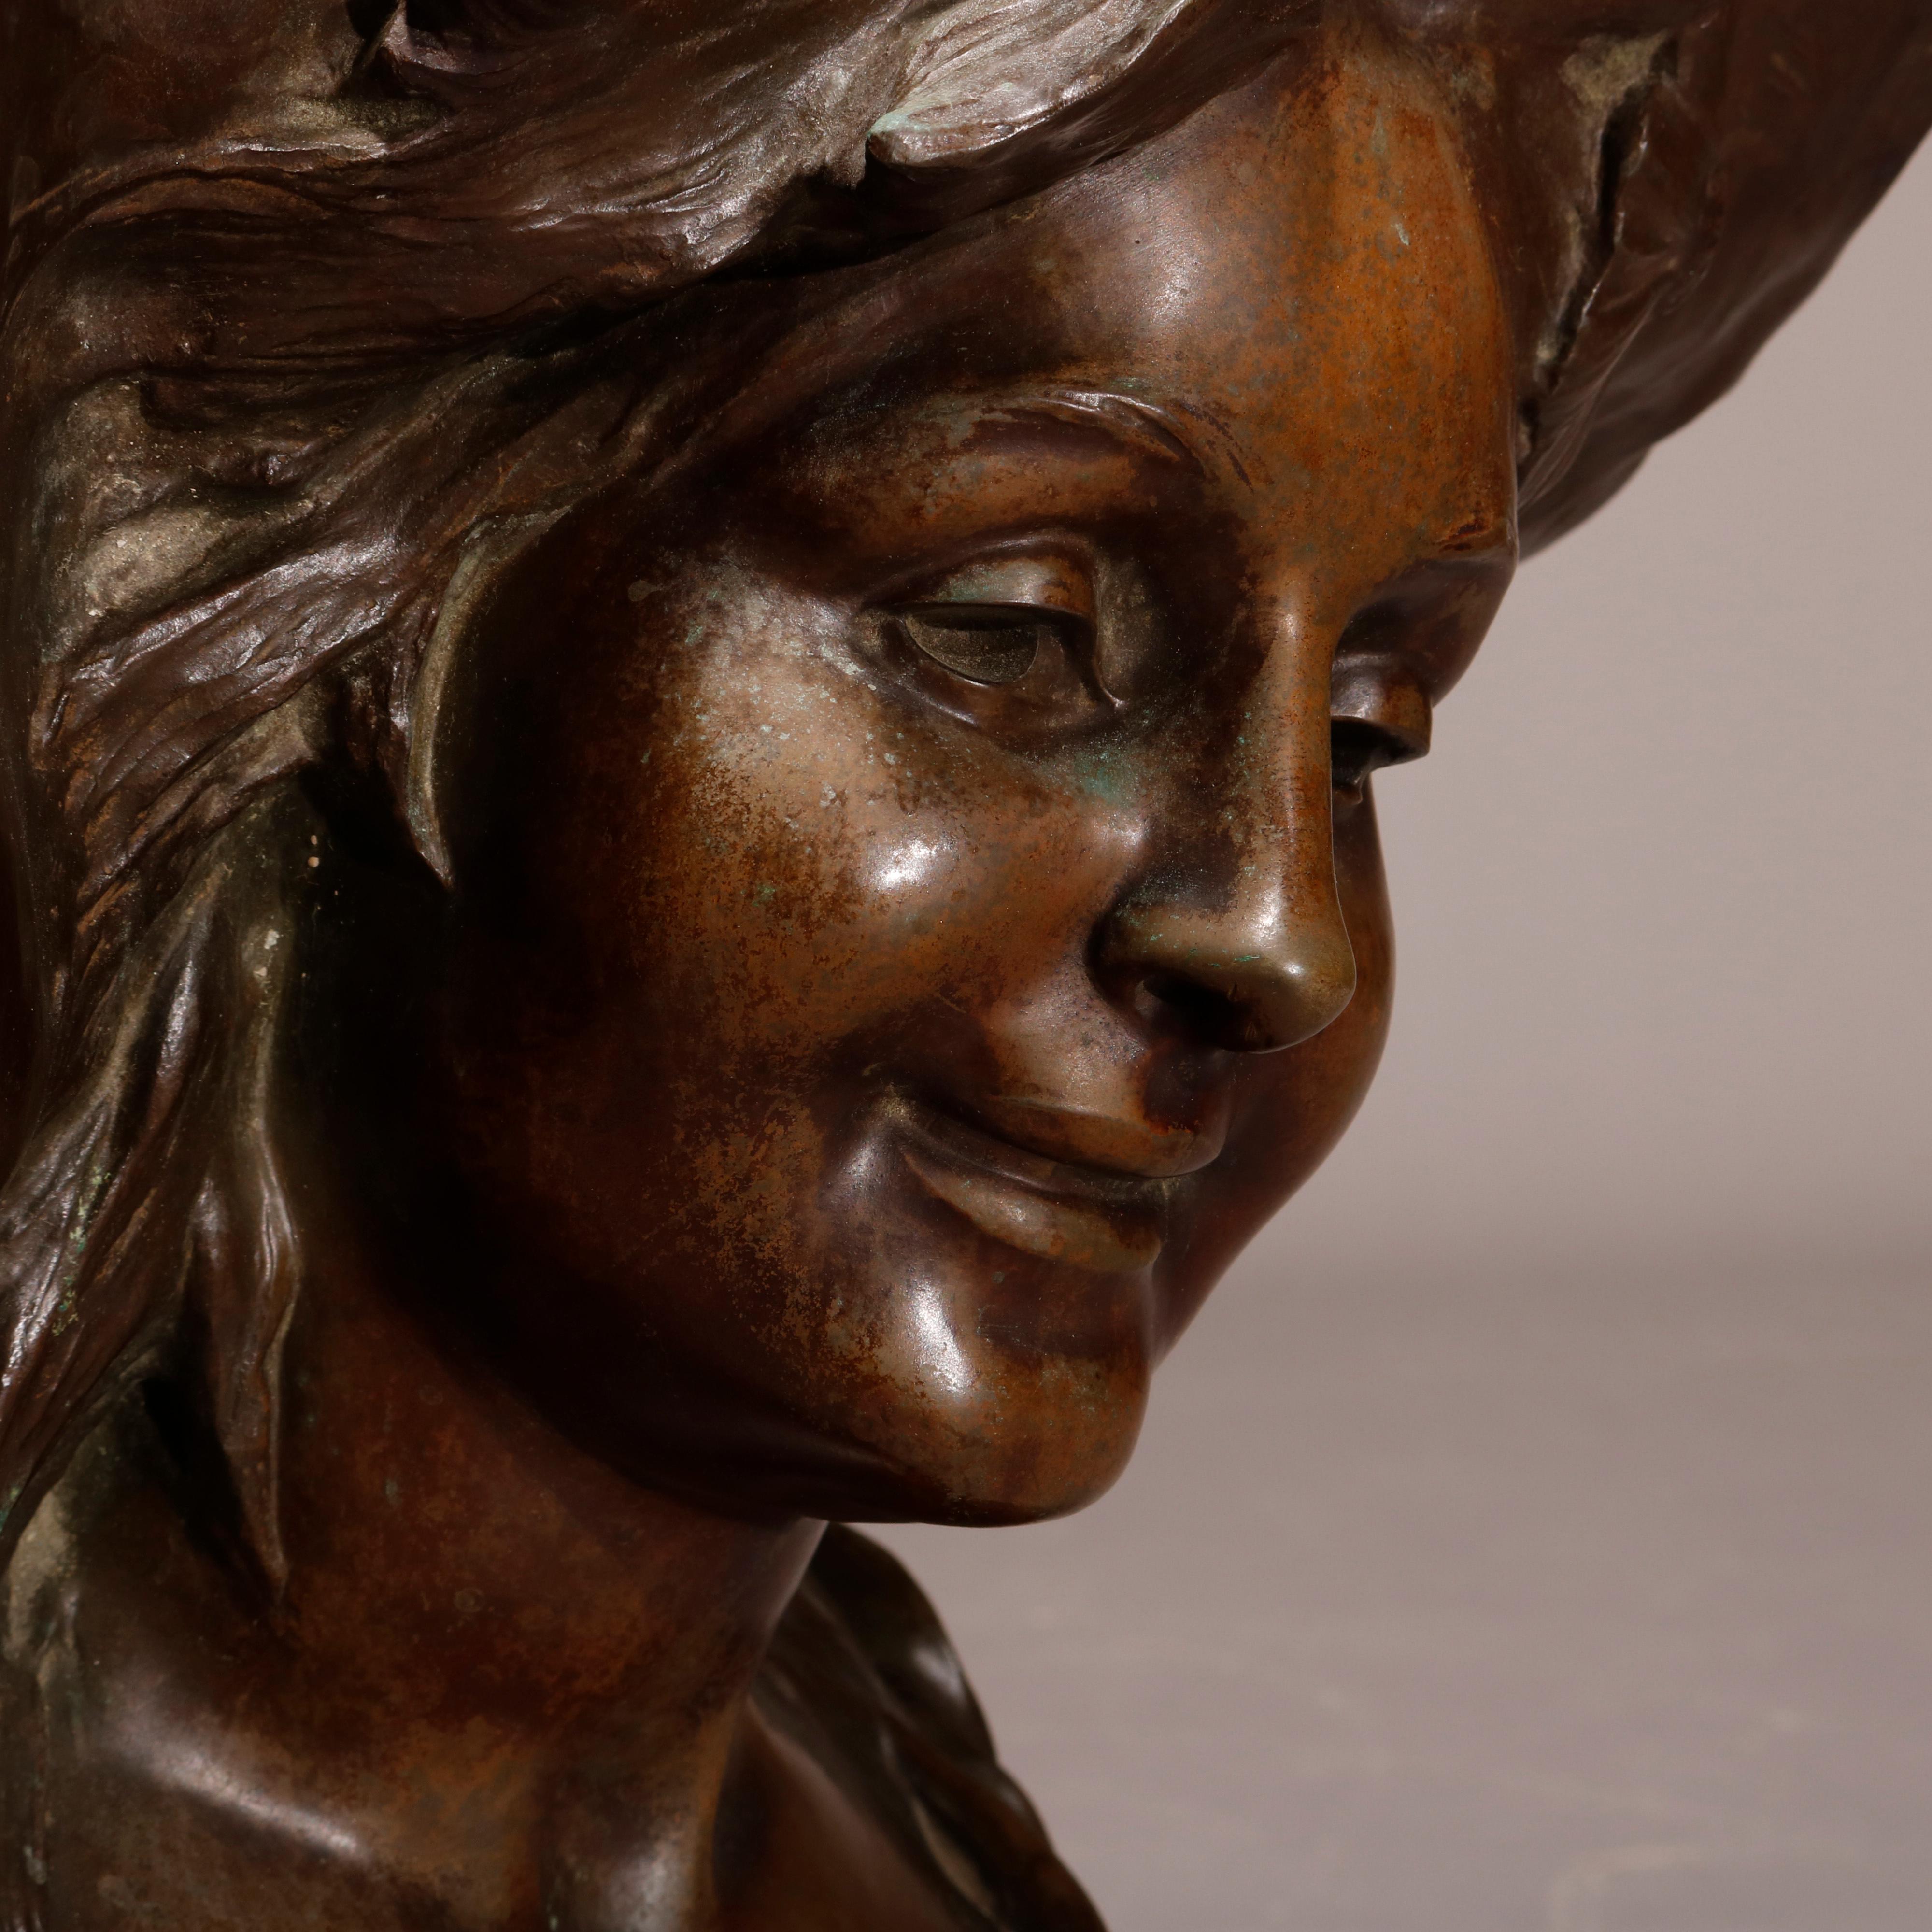 An antique and large French Art Nouveau portrait sculpture of a woman wearing a hat, artist signed illegible, circa 1890.

Measures: 22.5